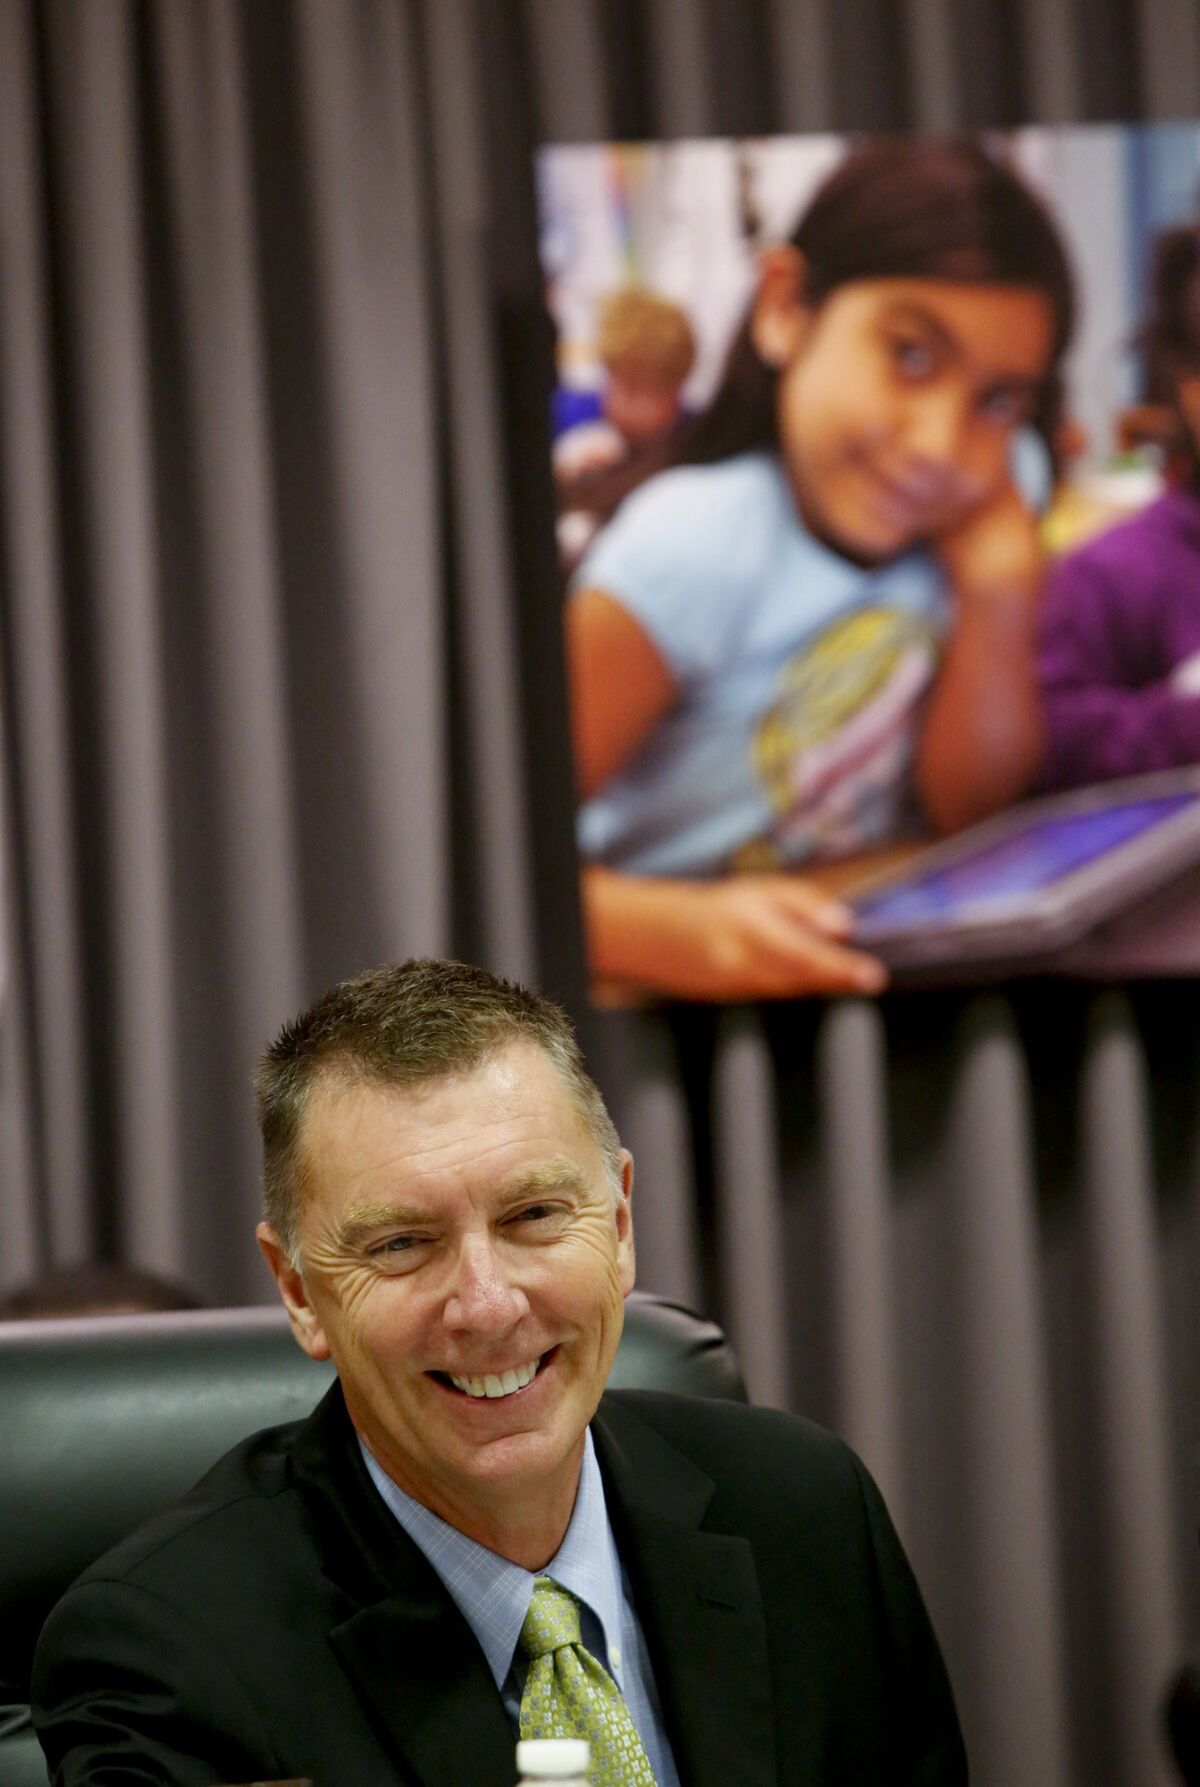 L.A. schools Supt. John Deasy defended the $1-billion iPad program he introduced in a TV special produced and aired by the Los Angeles Unified School District.